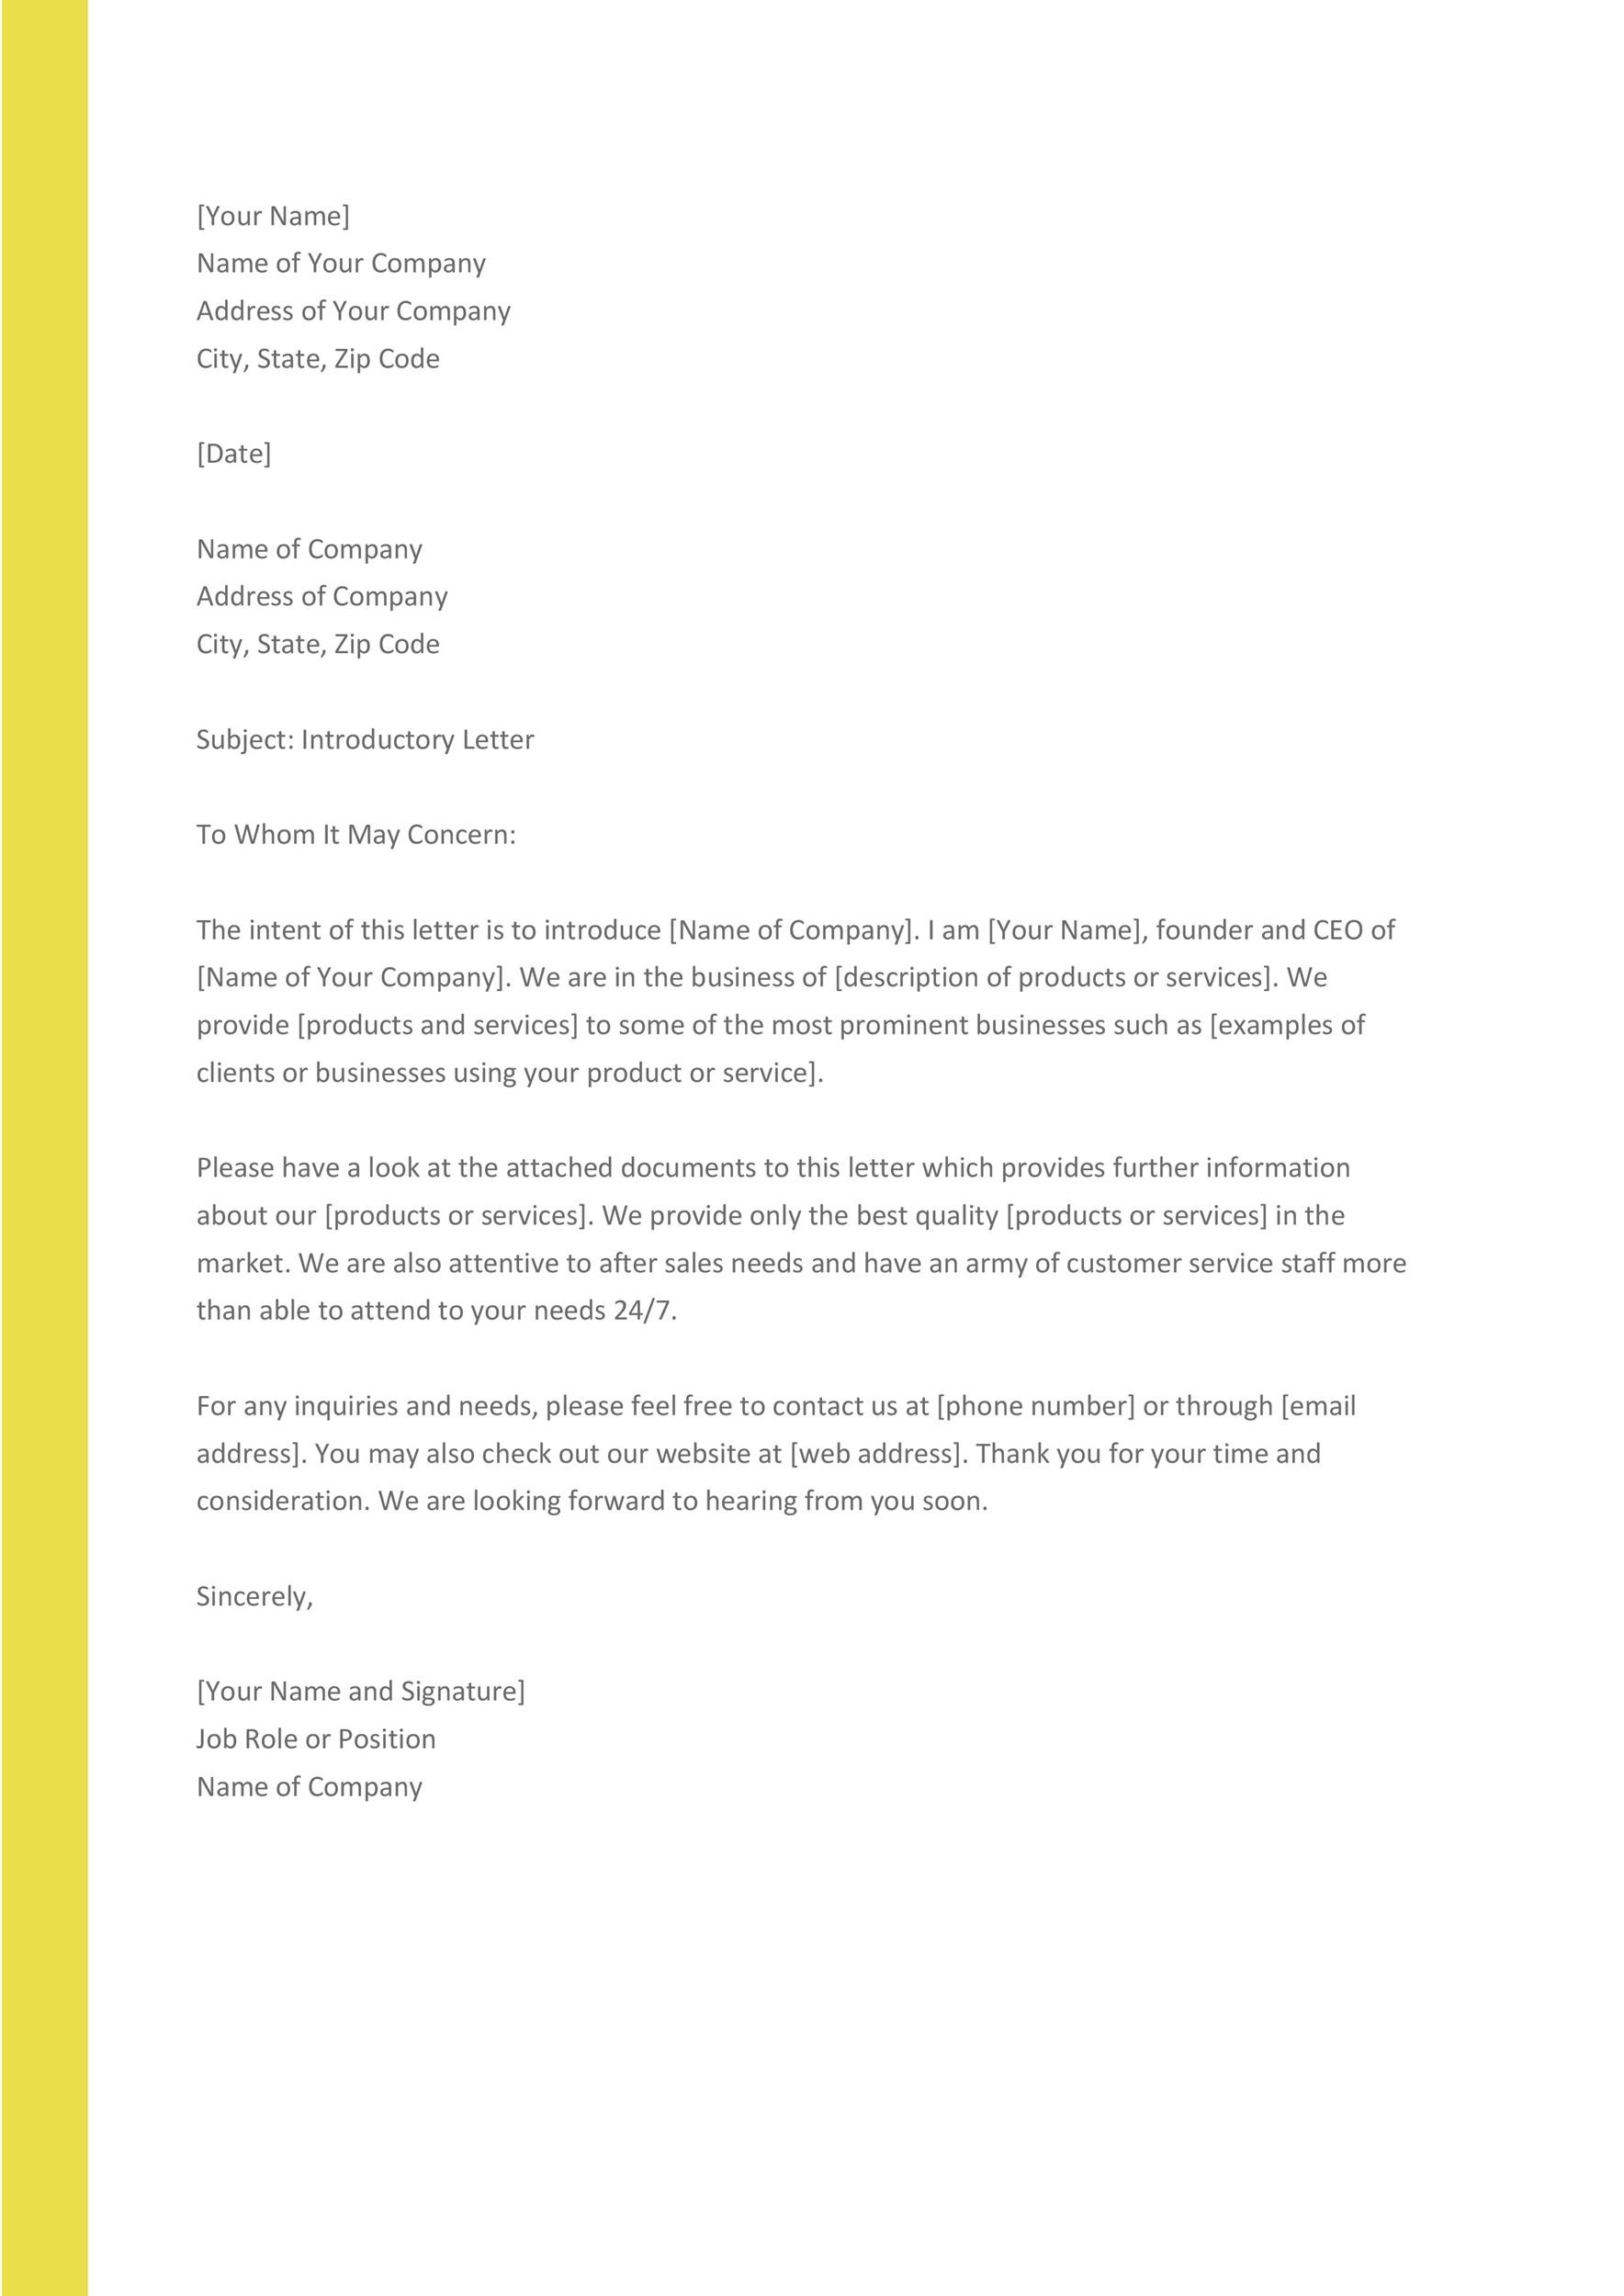 Free business introduction letter 31